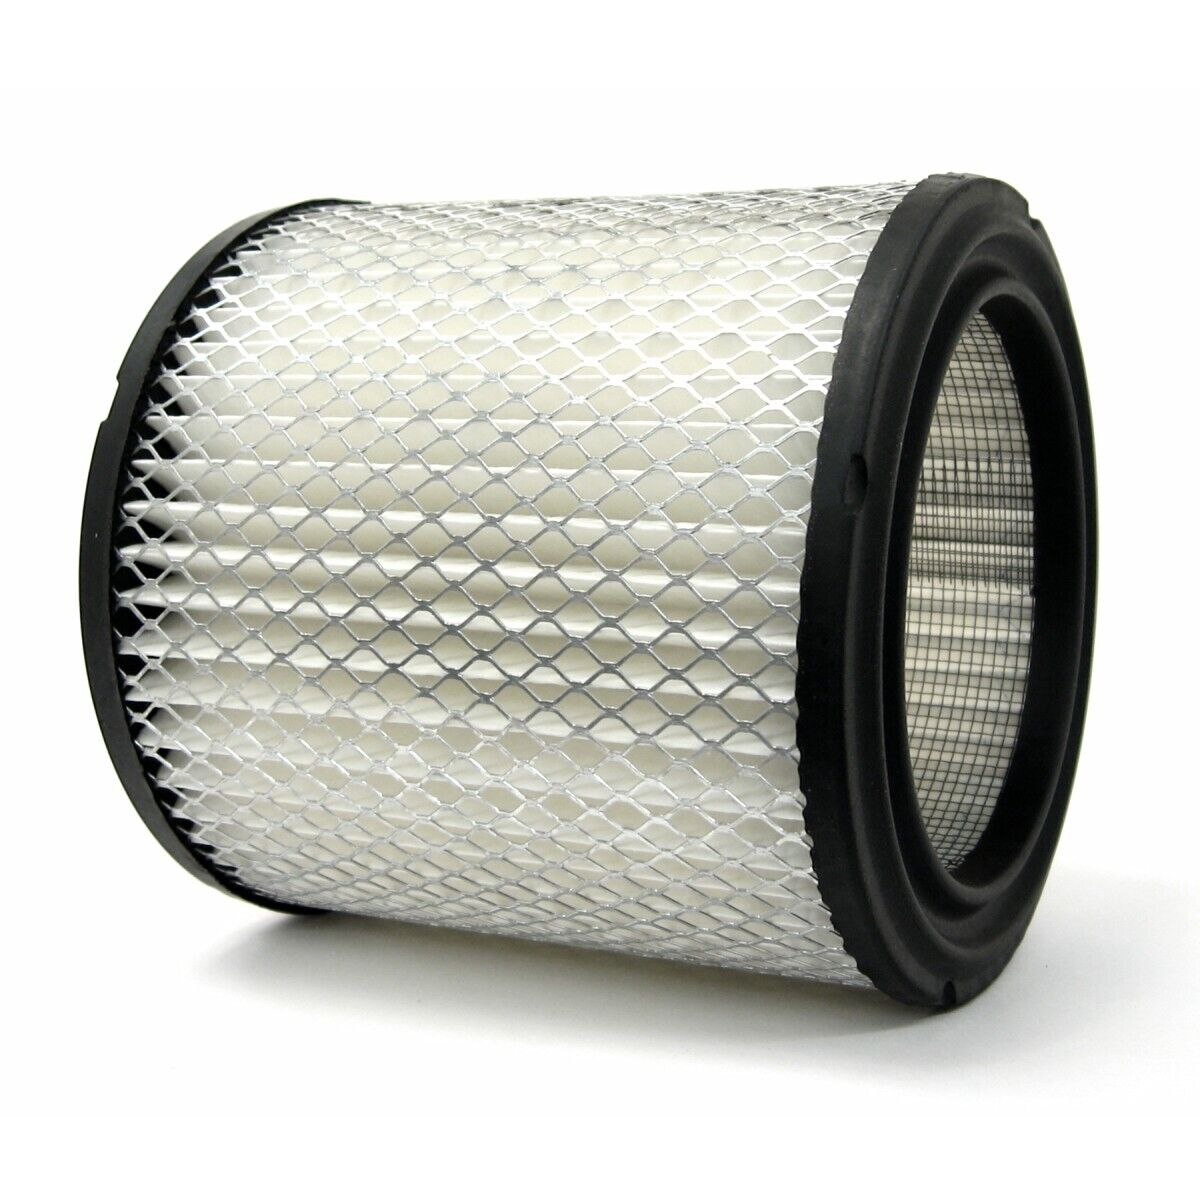 A633C AC Delco Air Filter for Chevy Olds Le Sabre NINETY EIGHT Cutlass LeSabre